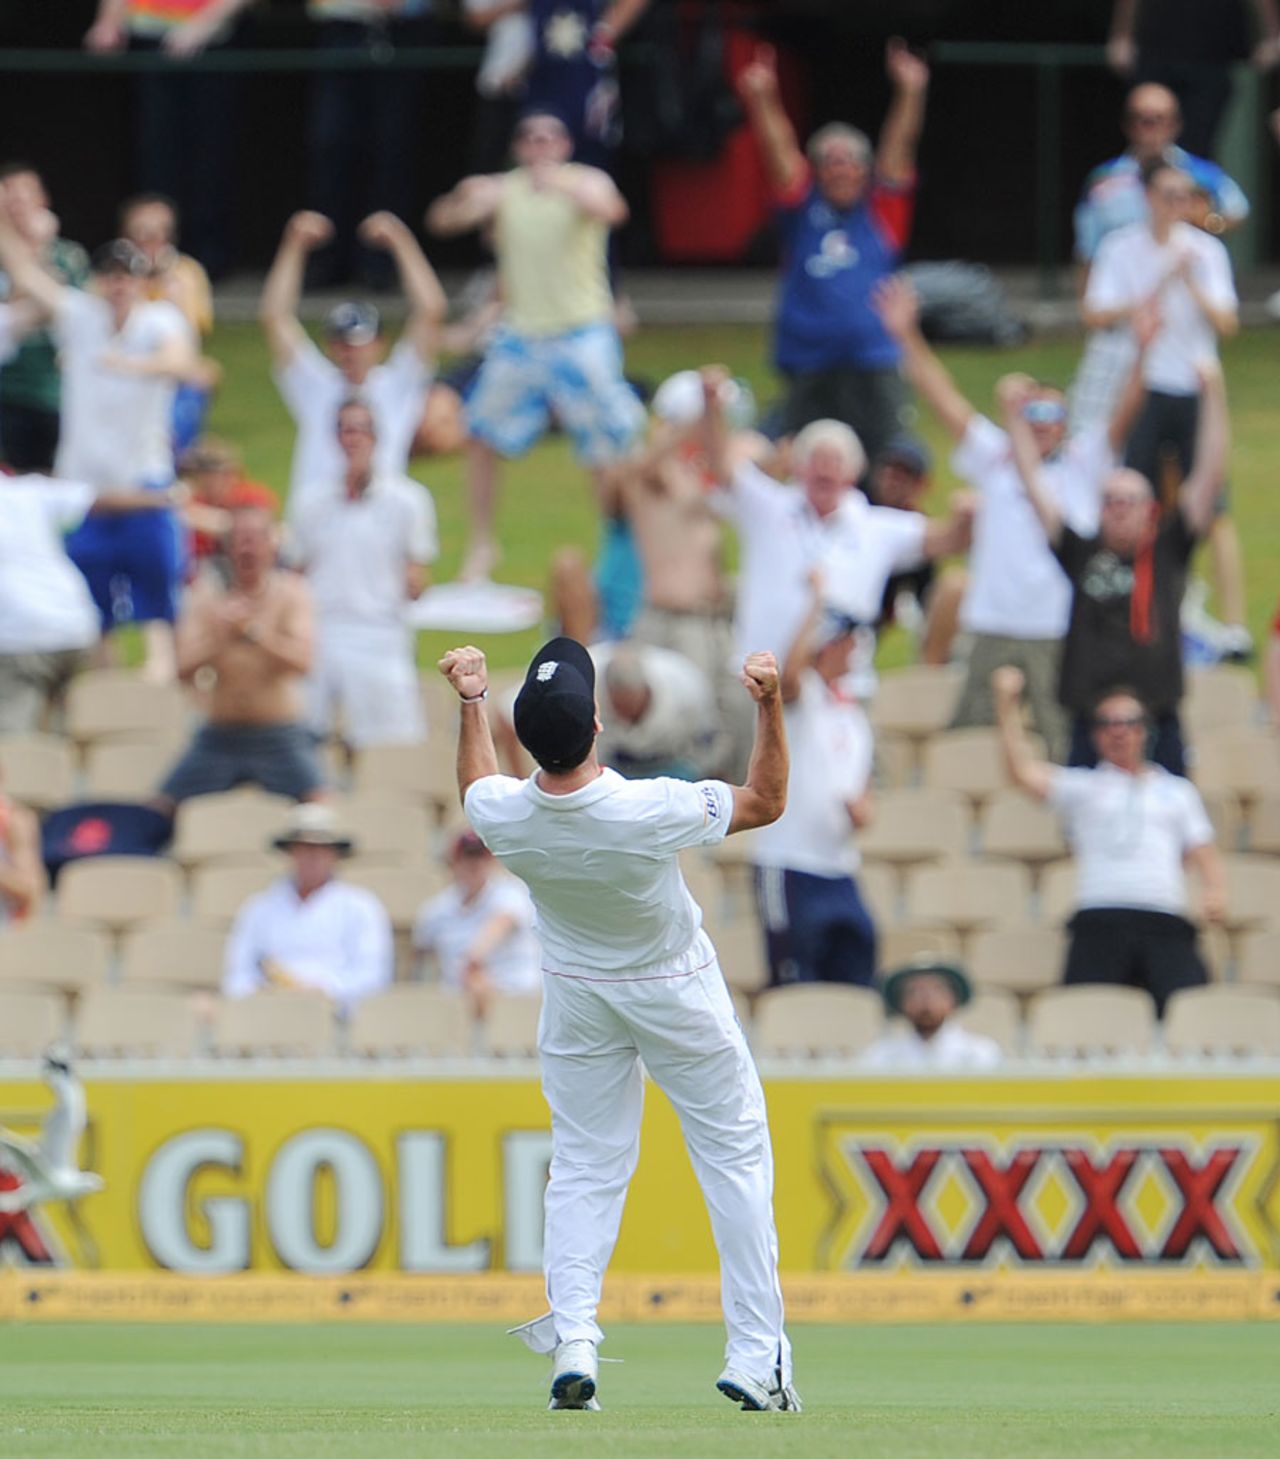 James Anderson roared in celebration towards the England supporters after catching Michael Hussey, Australia v England, 2nd Test, Adelaide, 5th day, December 7, 2010